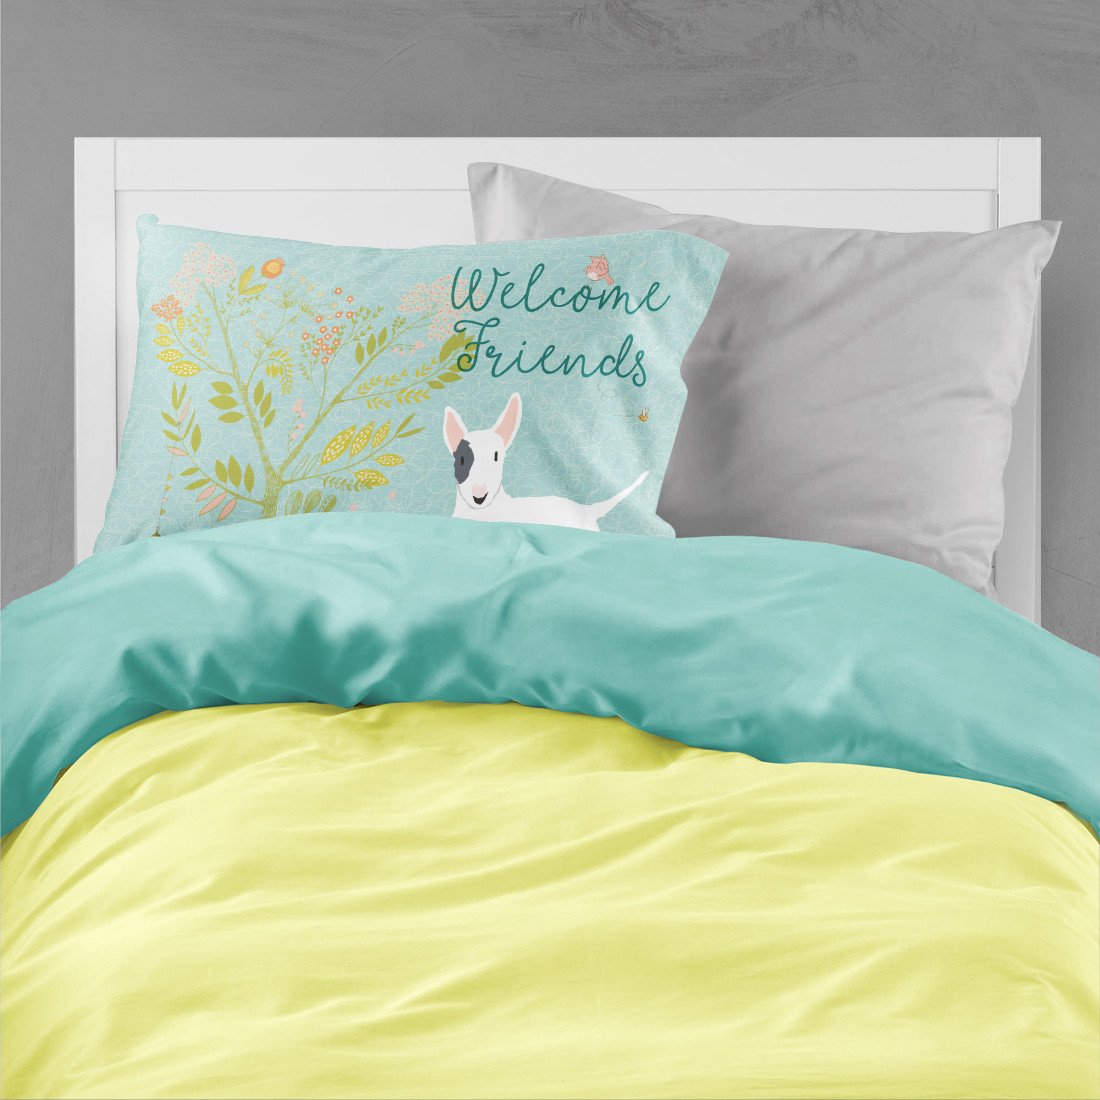 Welcome Friends White Patched Bull Terrier Fabric Standard Pillowcase BB7607PILLOWCASE by Caroline's Treasures